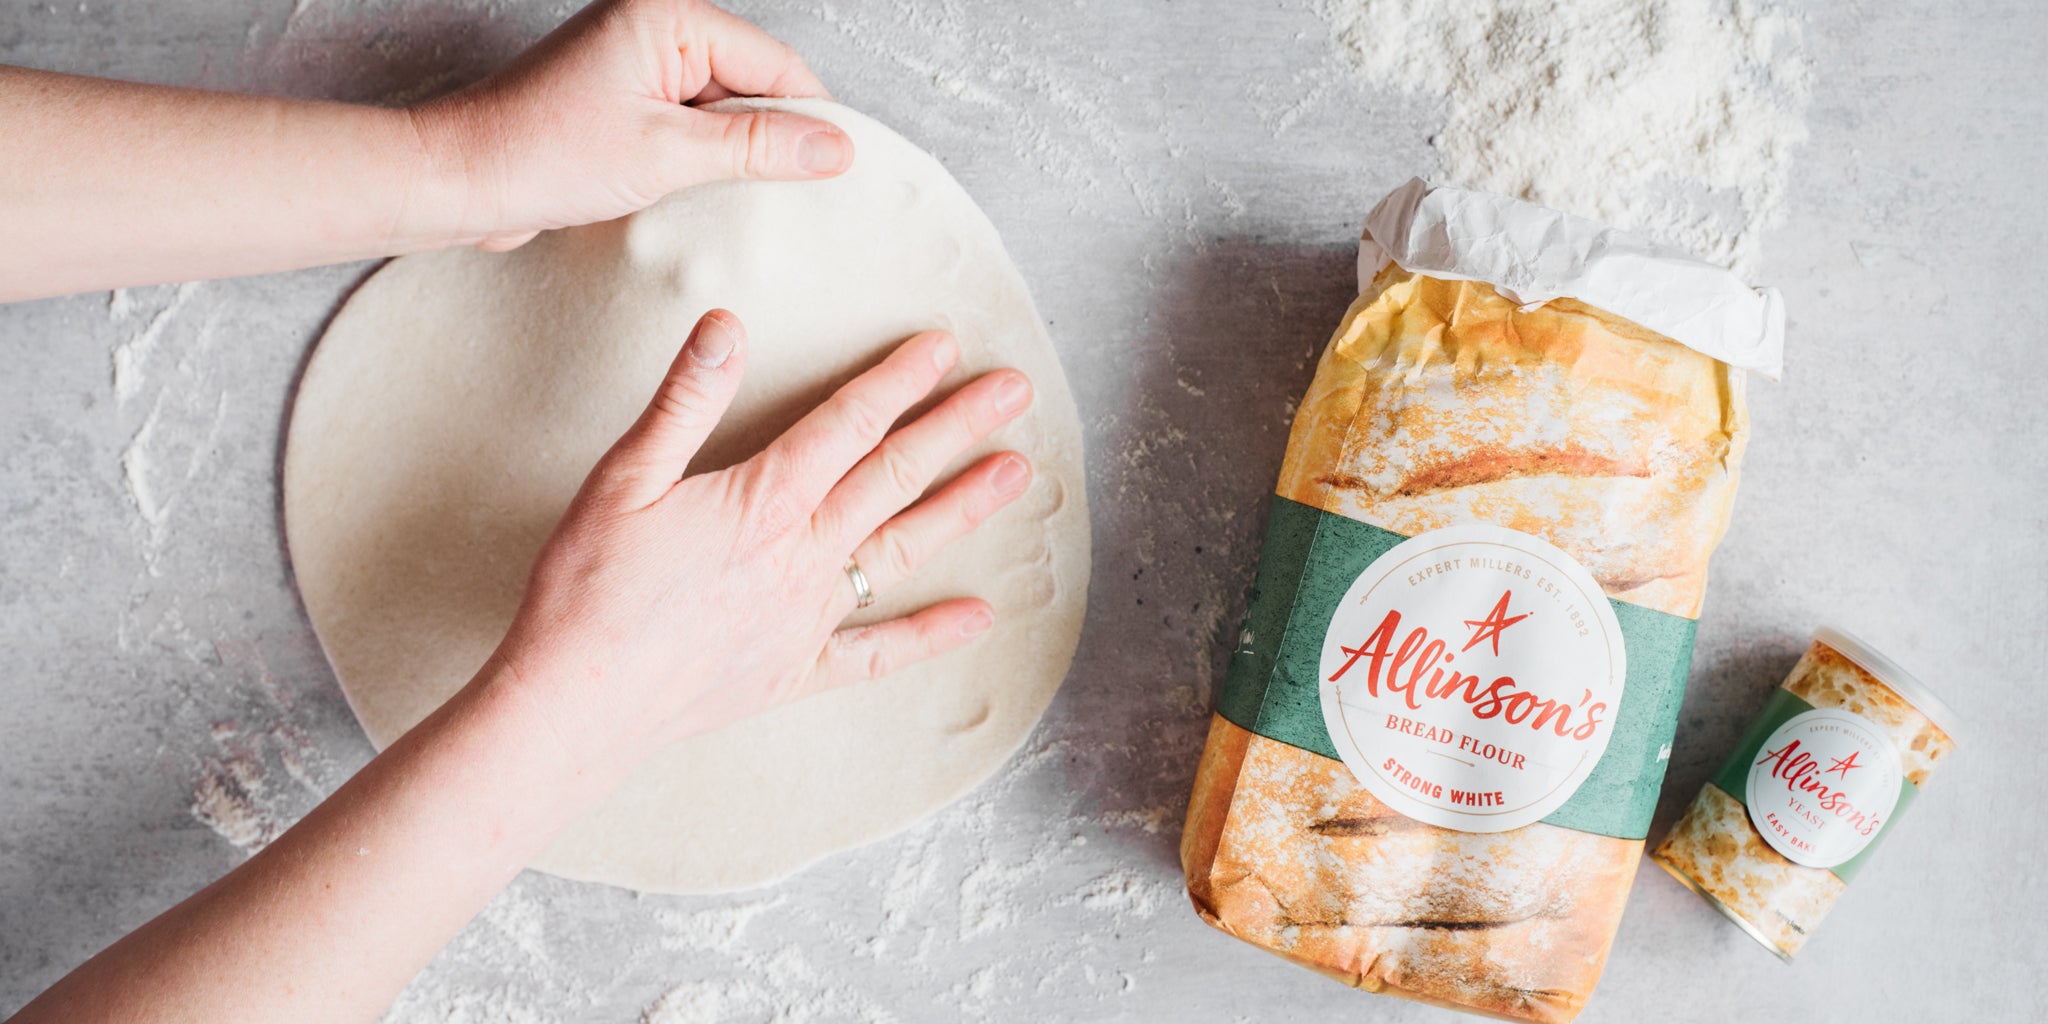 Hands spreading out pizza dough alongside a pack of flour and yeast